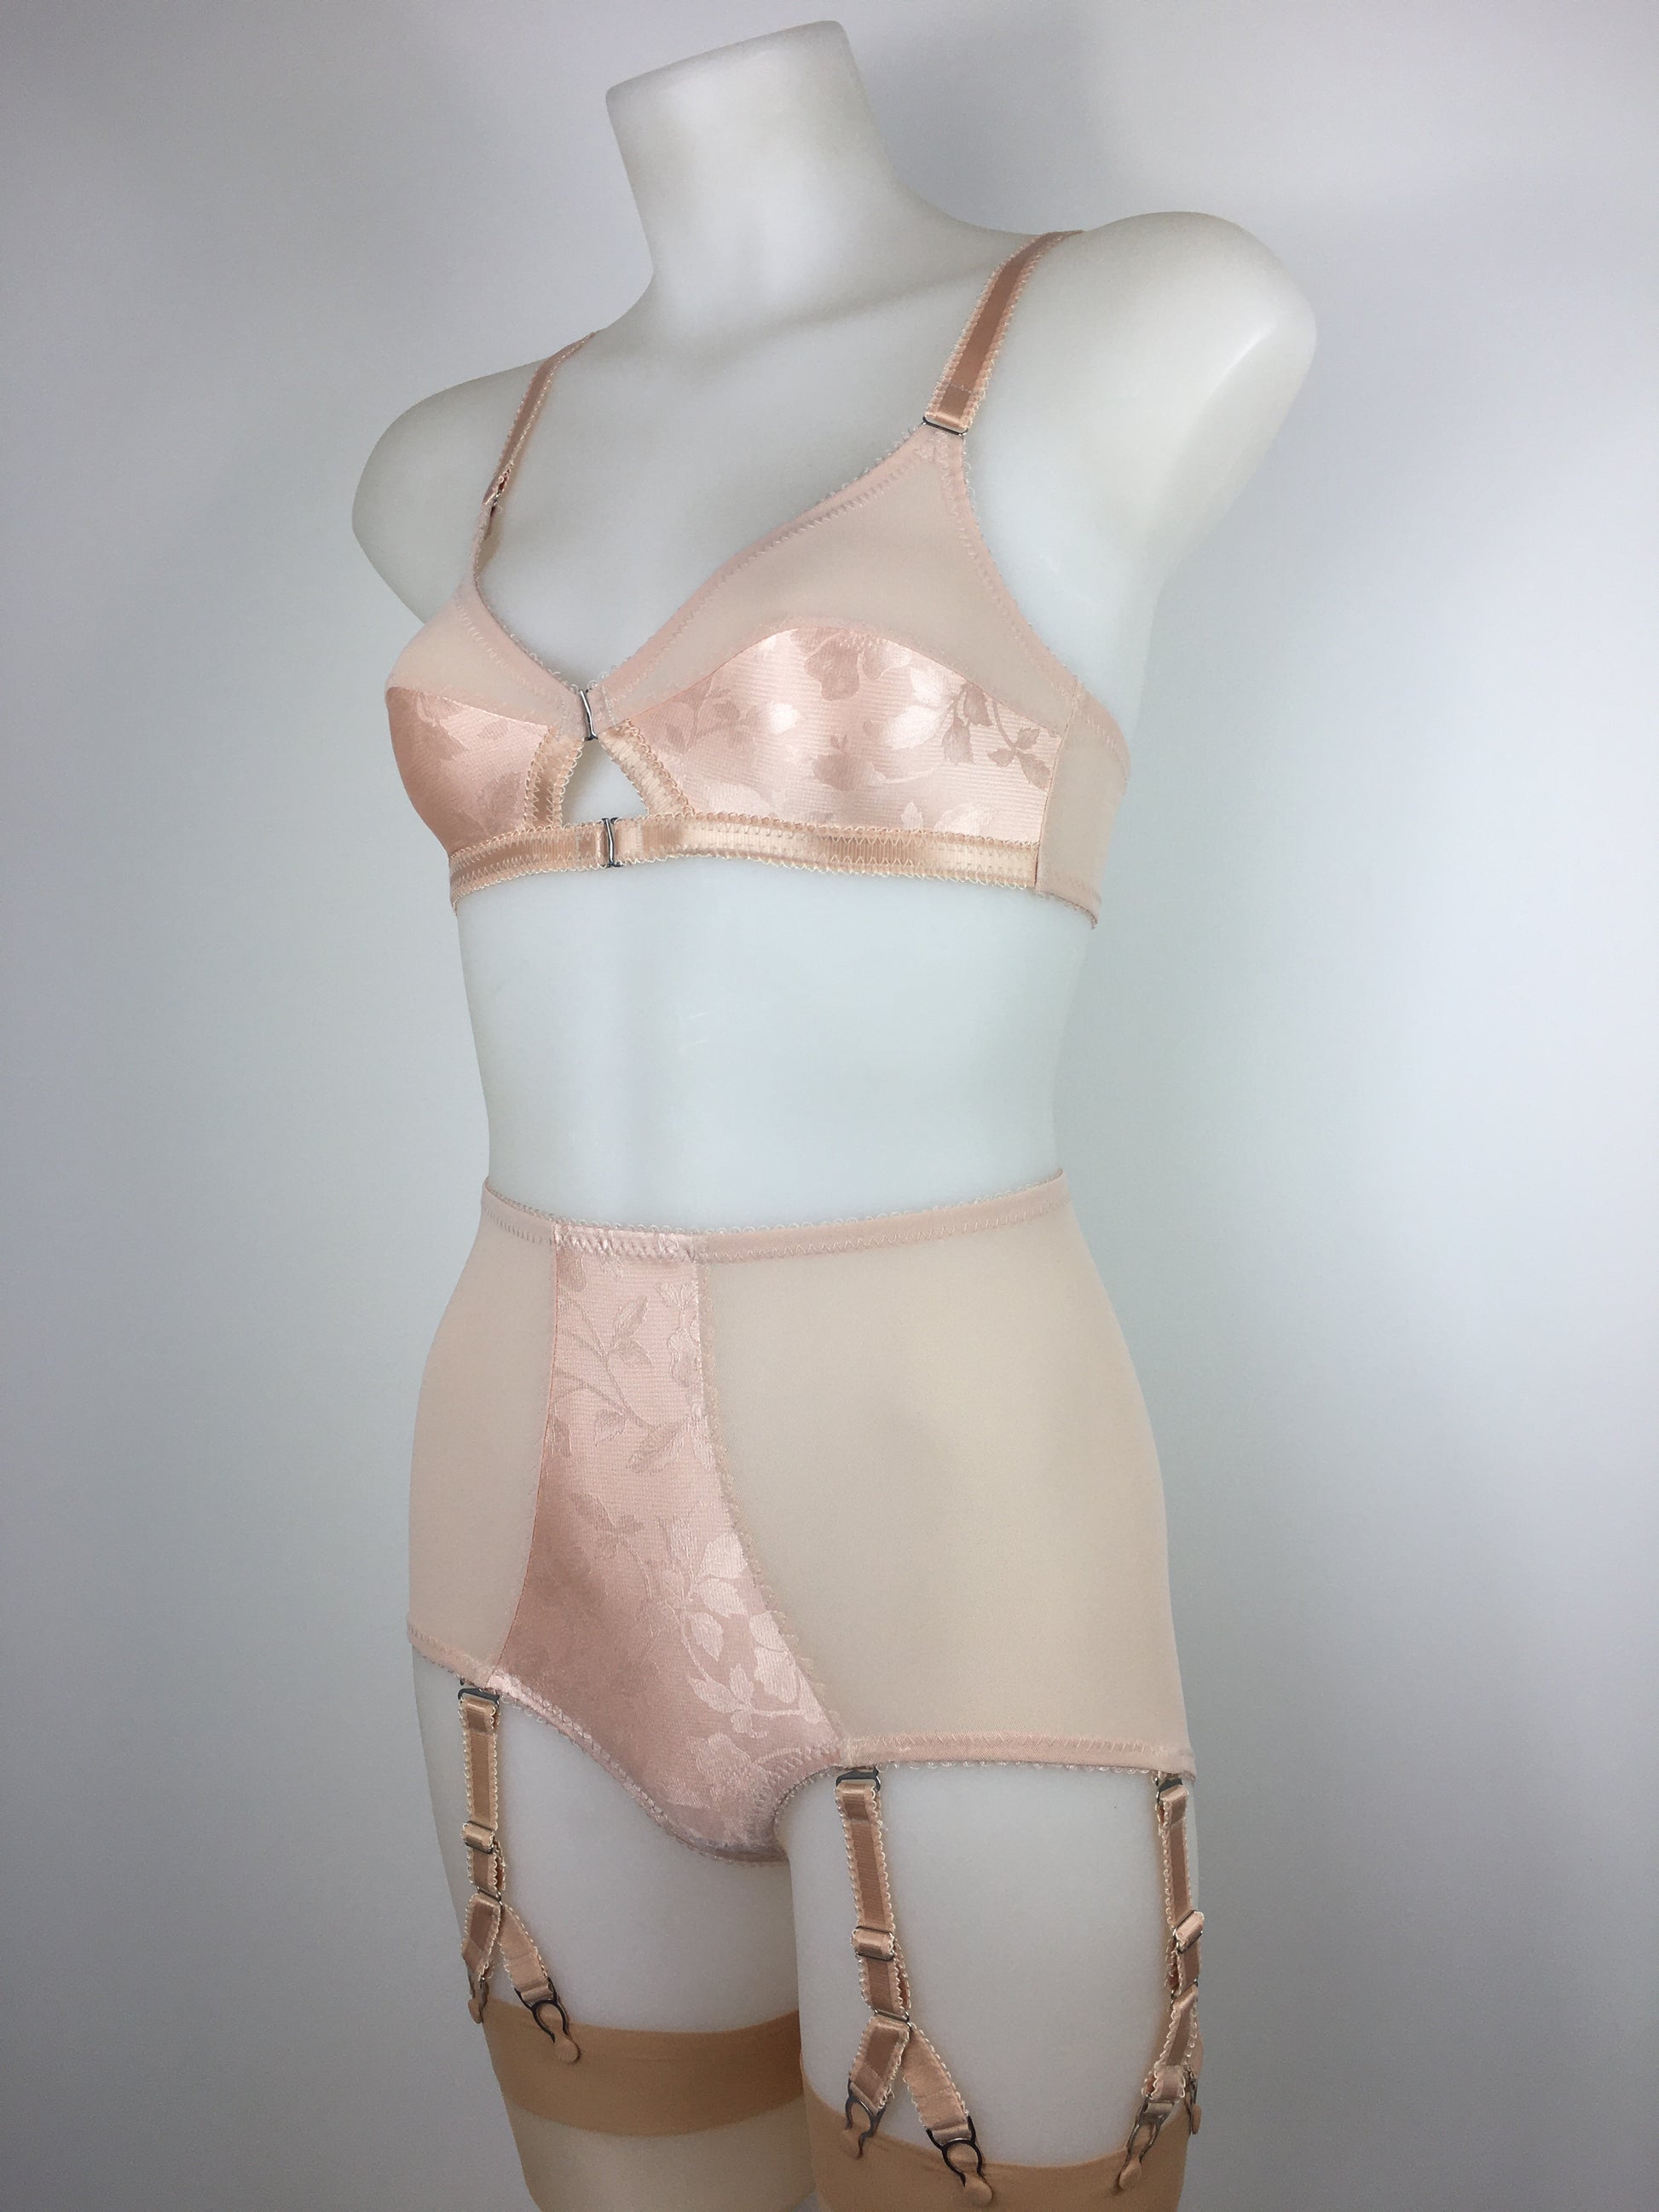 Our most authentic looking vintage inspired lingerie yet. Perfect peachy satin front fastening soft bra with faux vintage peach lower cups and nude biscotti mesh upper cups. Fastens at the front with two hooks. Our signature bralette shape makes the perfect faux 1950s 1940s bra. Not as pointed as a bullet bra, the bra gives a subtle vintage silhouette